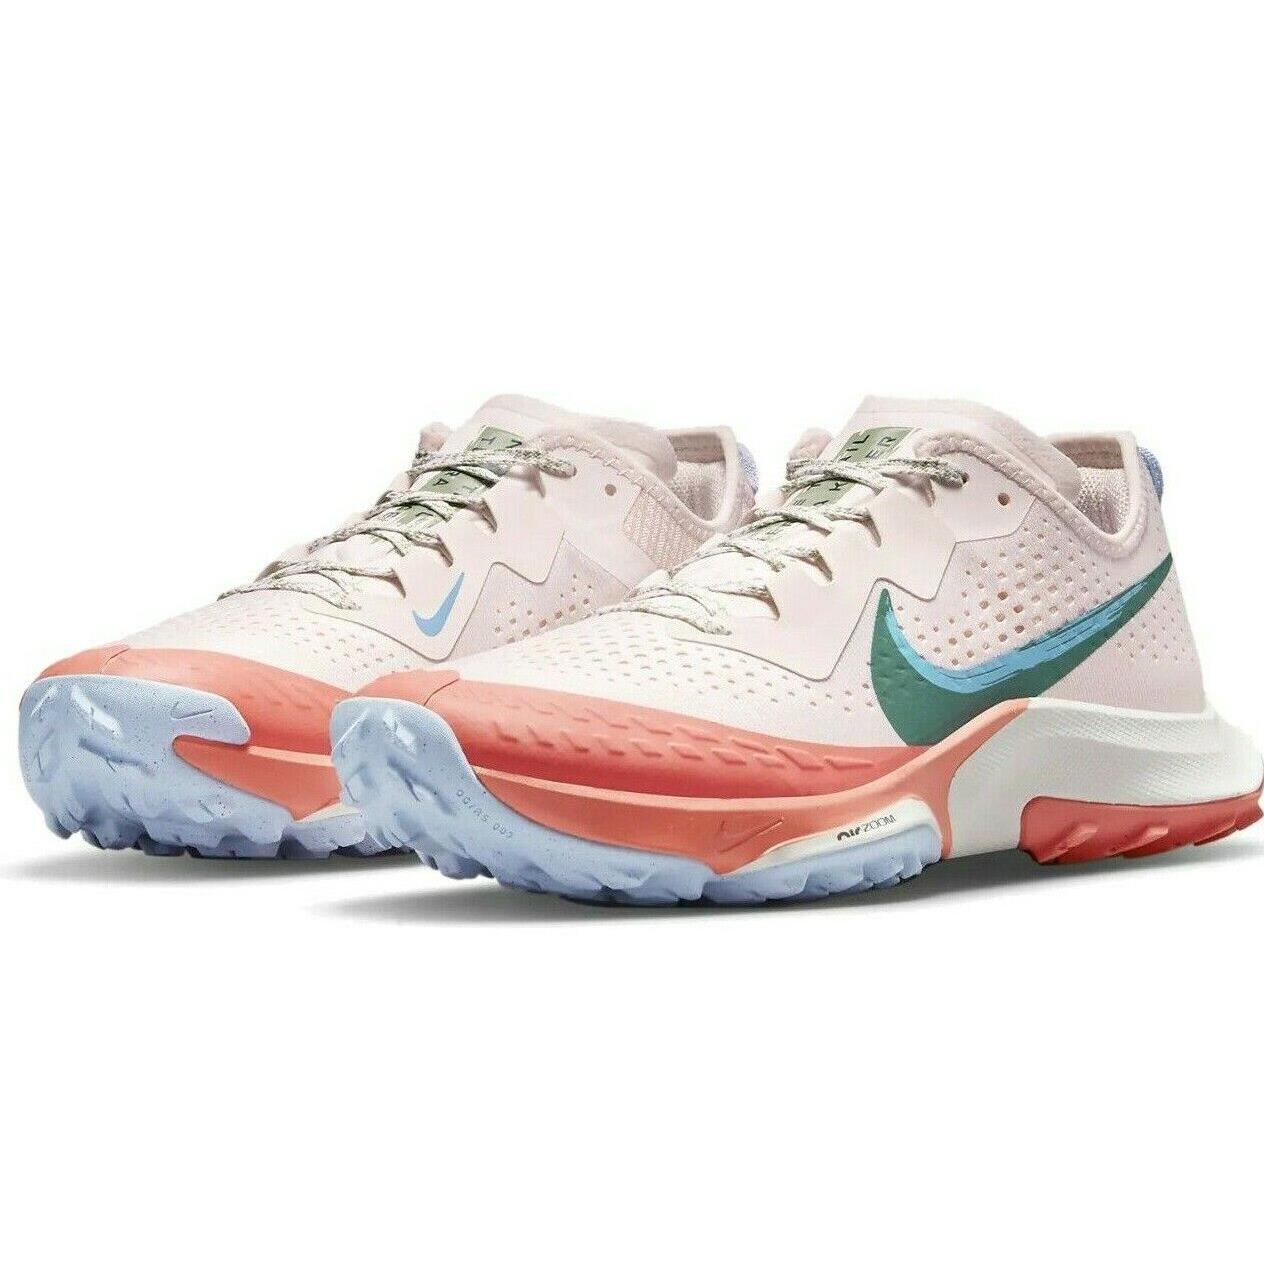 Nike Air Zoom Terra Kiger 7 Womens Size 9.5 Shoes CW6066 600 Light Pink - Multicolor